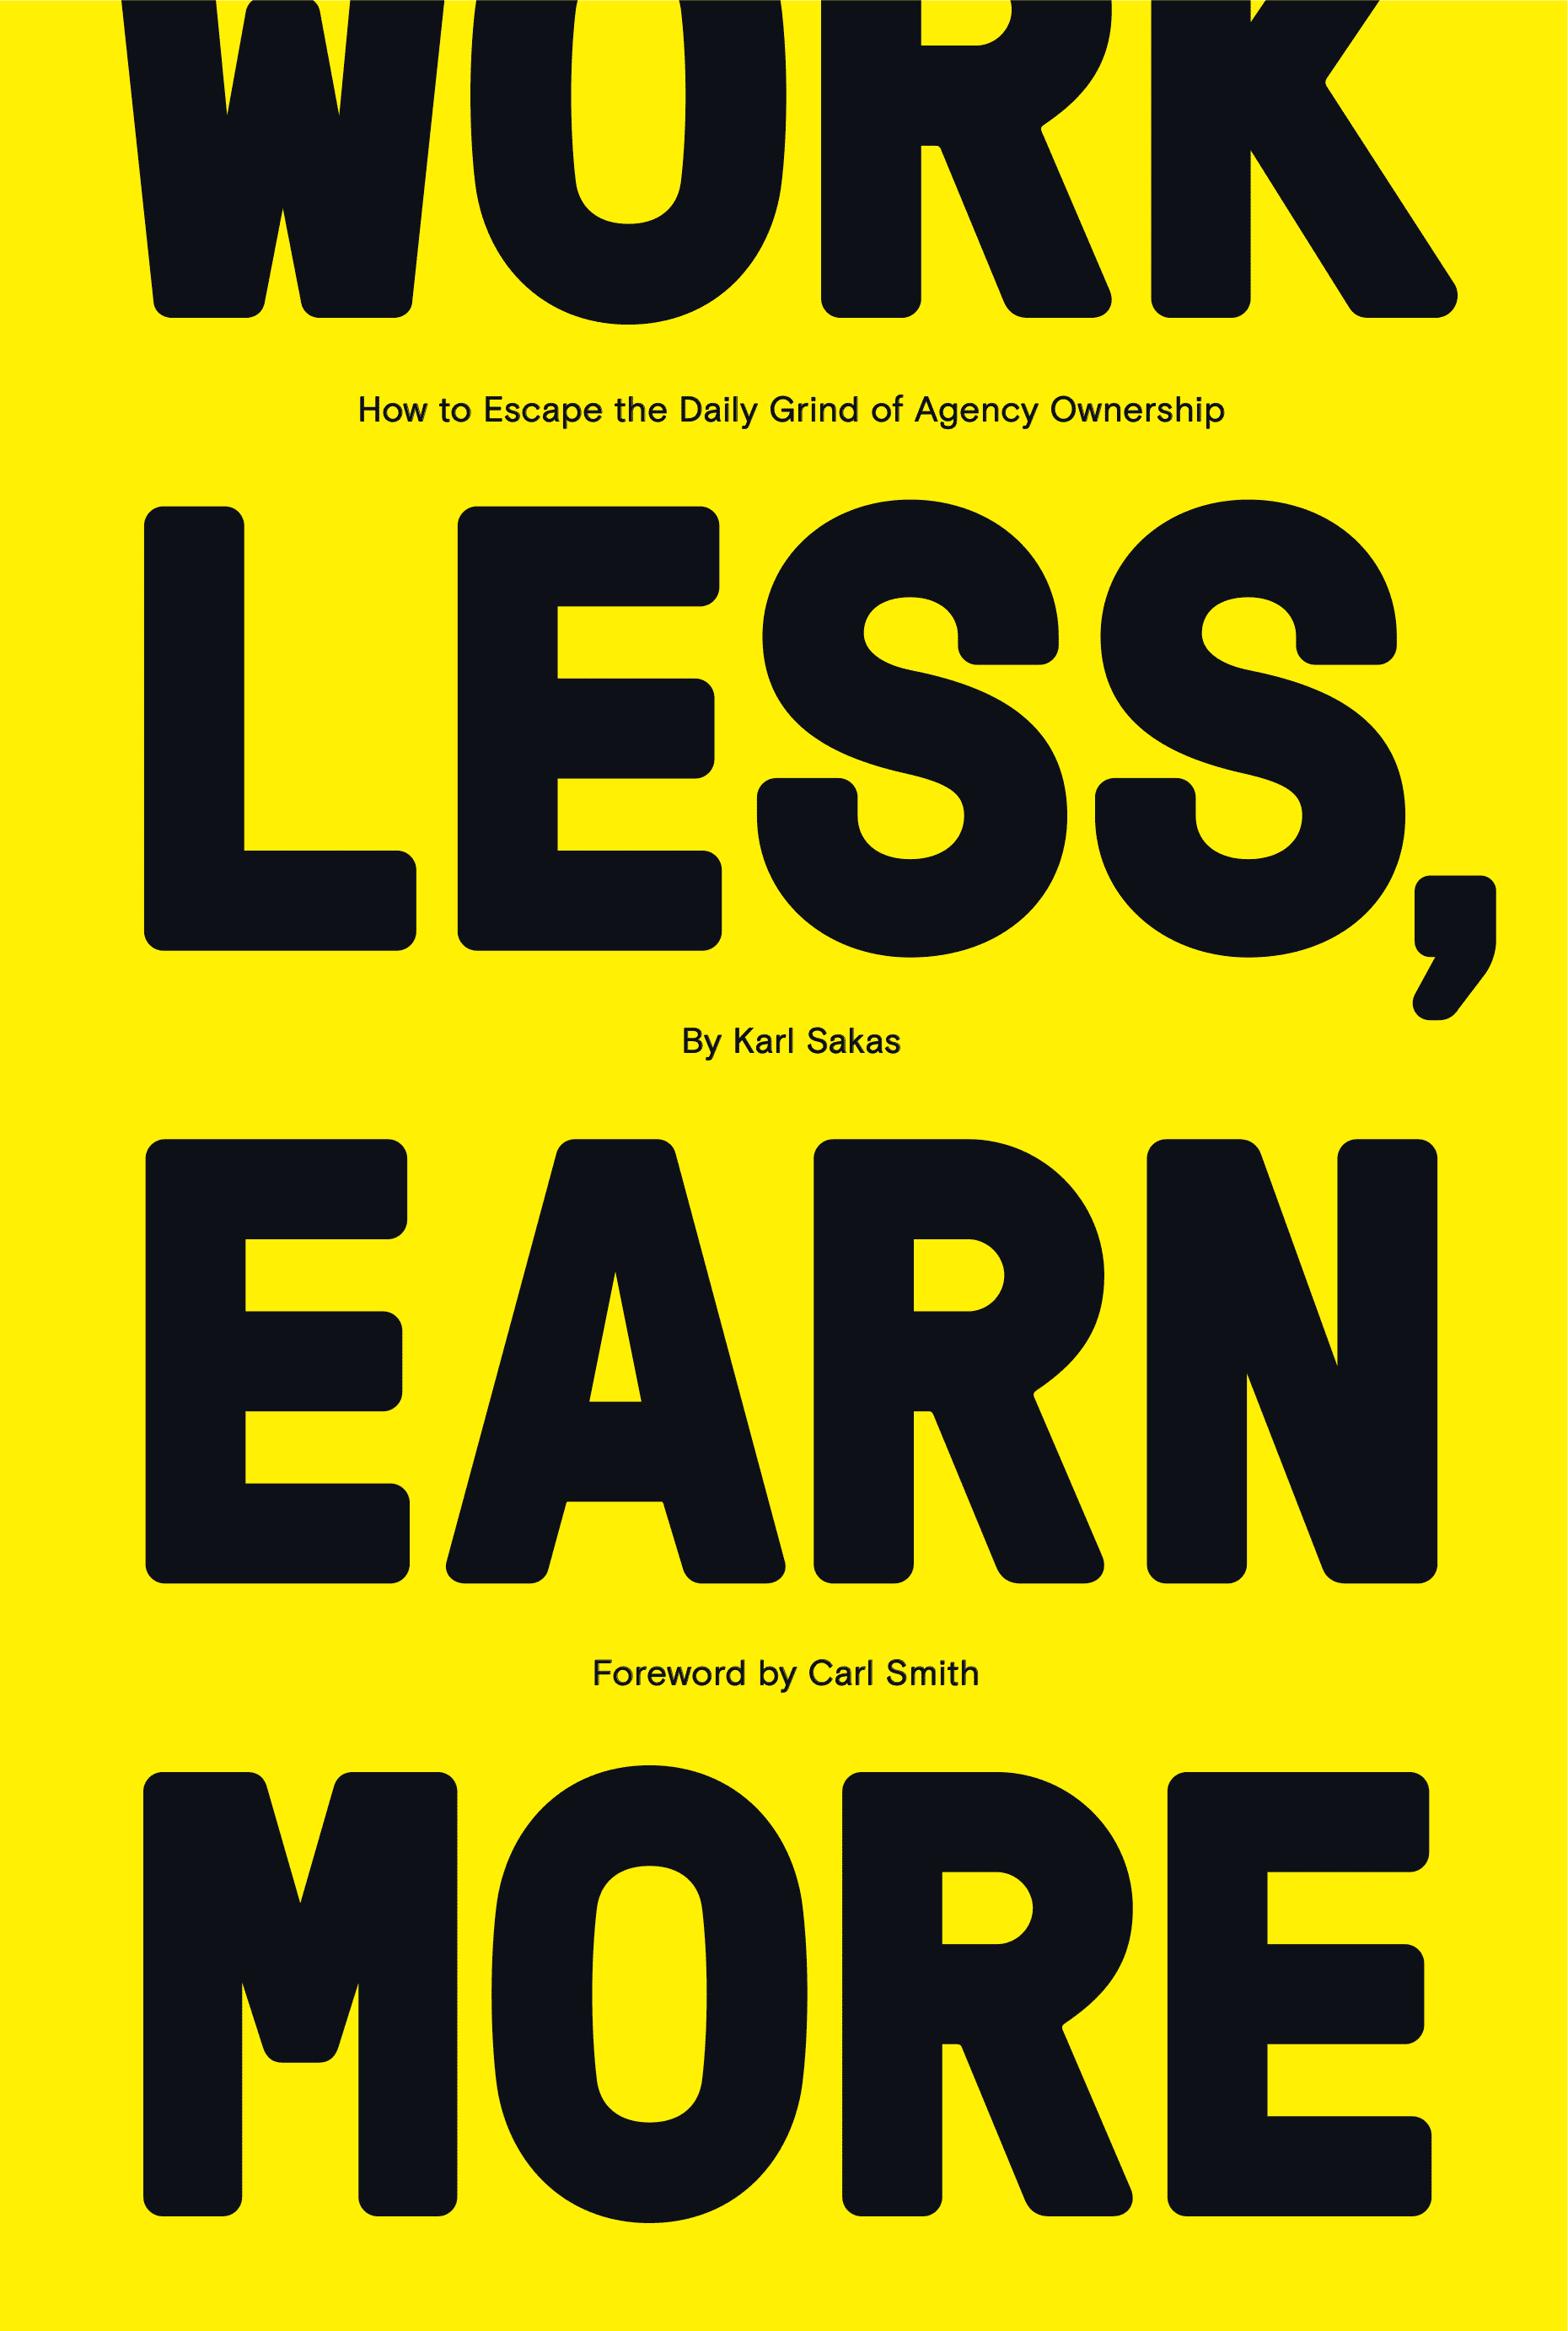 Book Cover: "Work Less, Earn More" by Karl Sakas